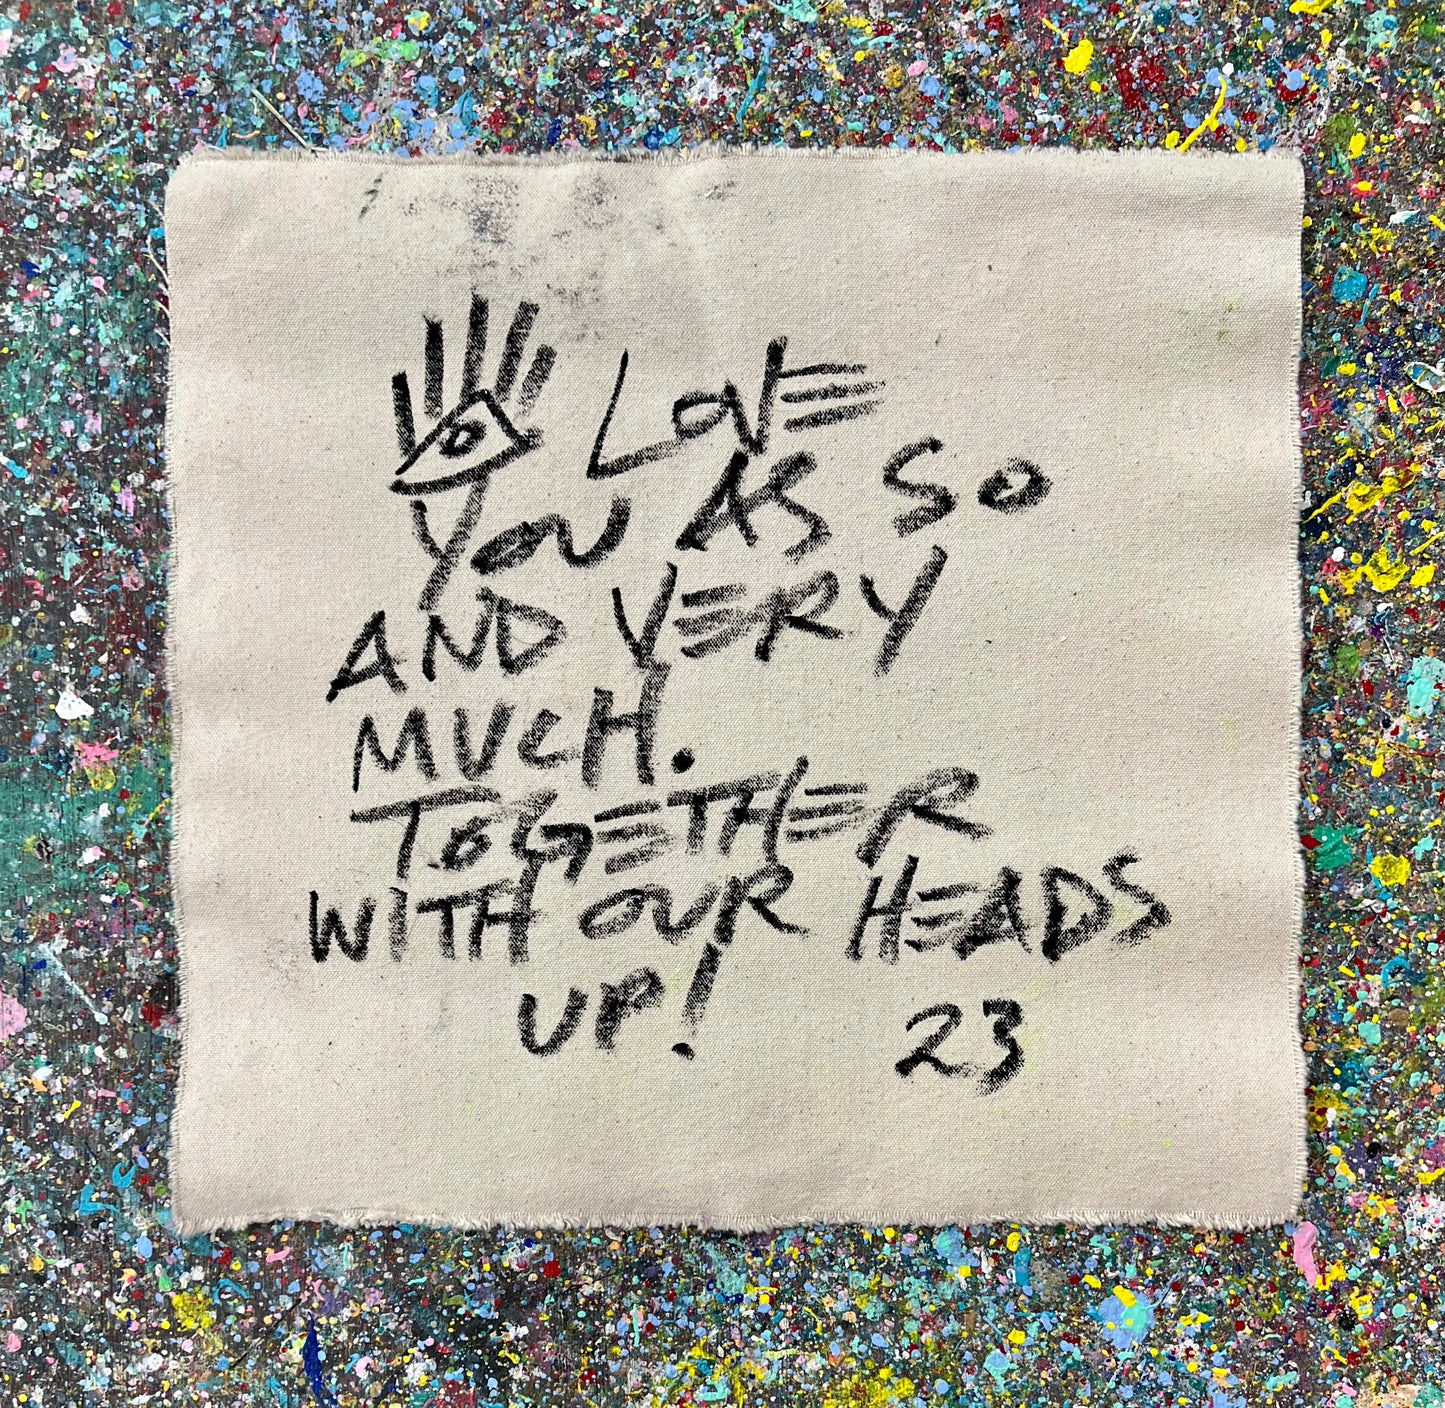 Together With Our Heads Up / Giraffes / November 2023